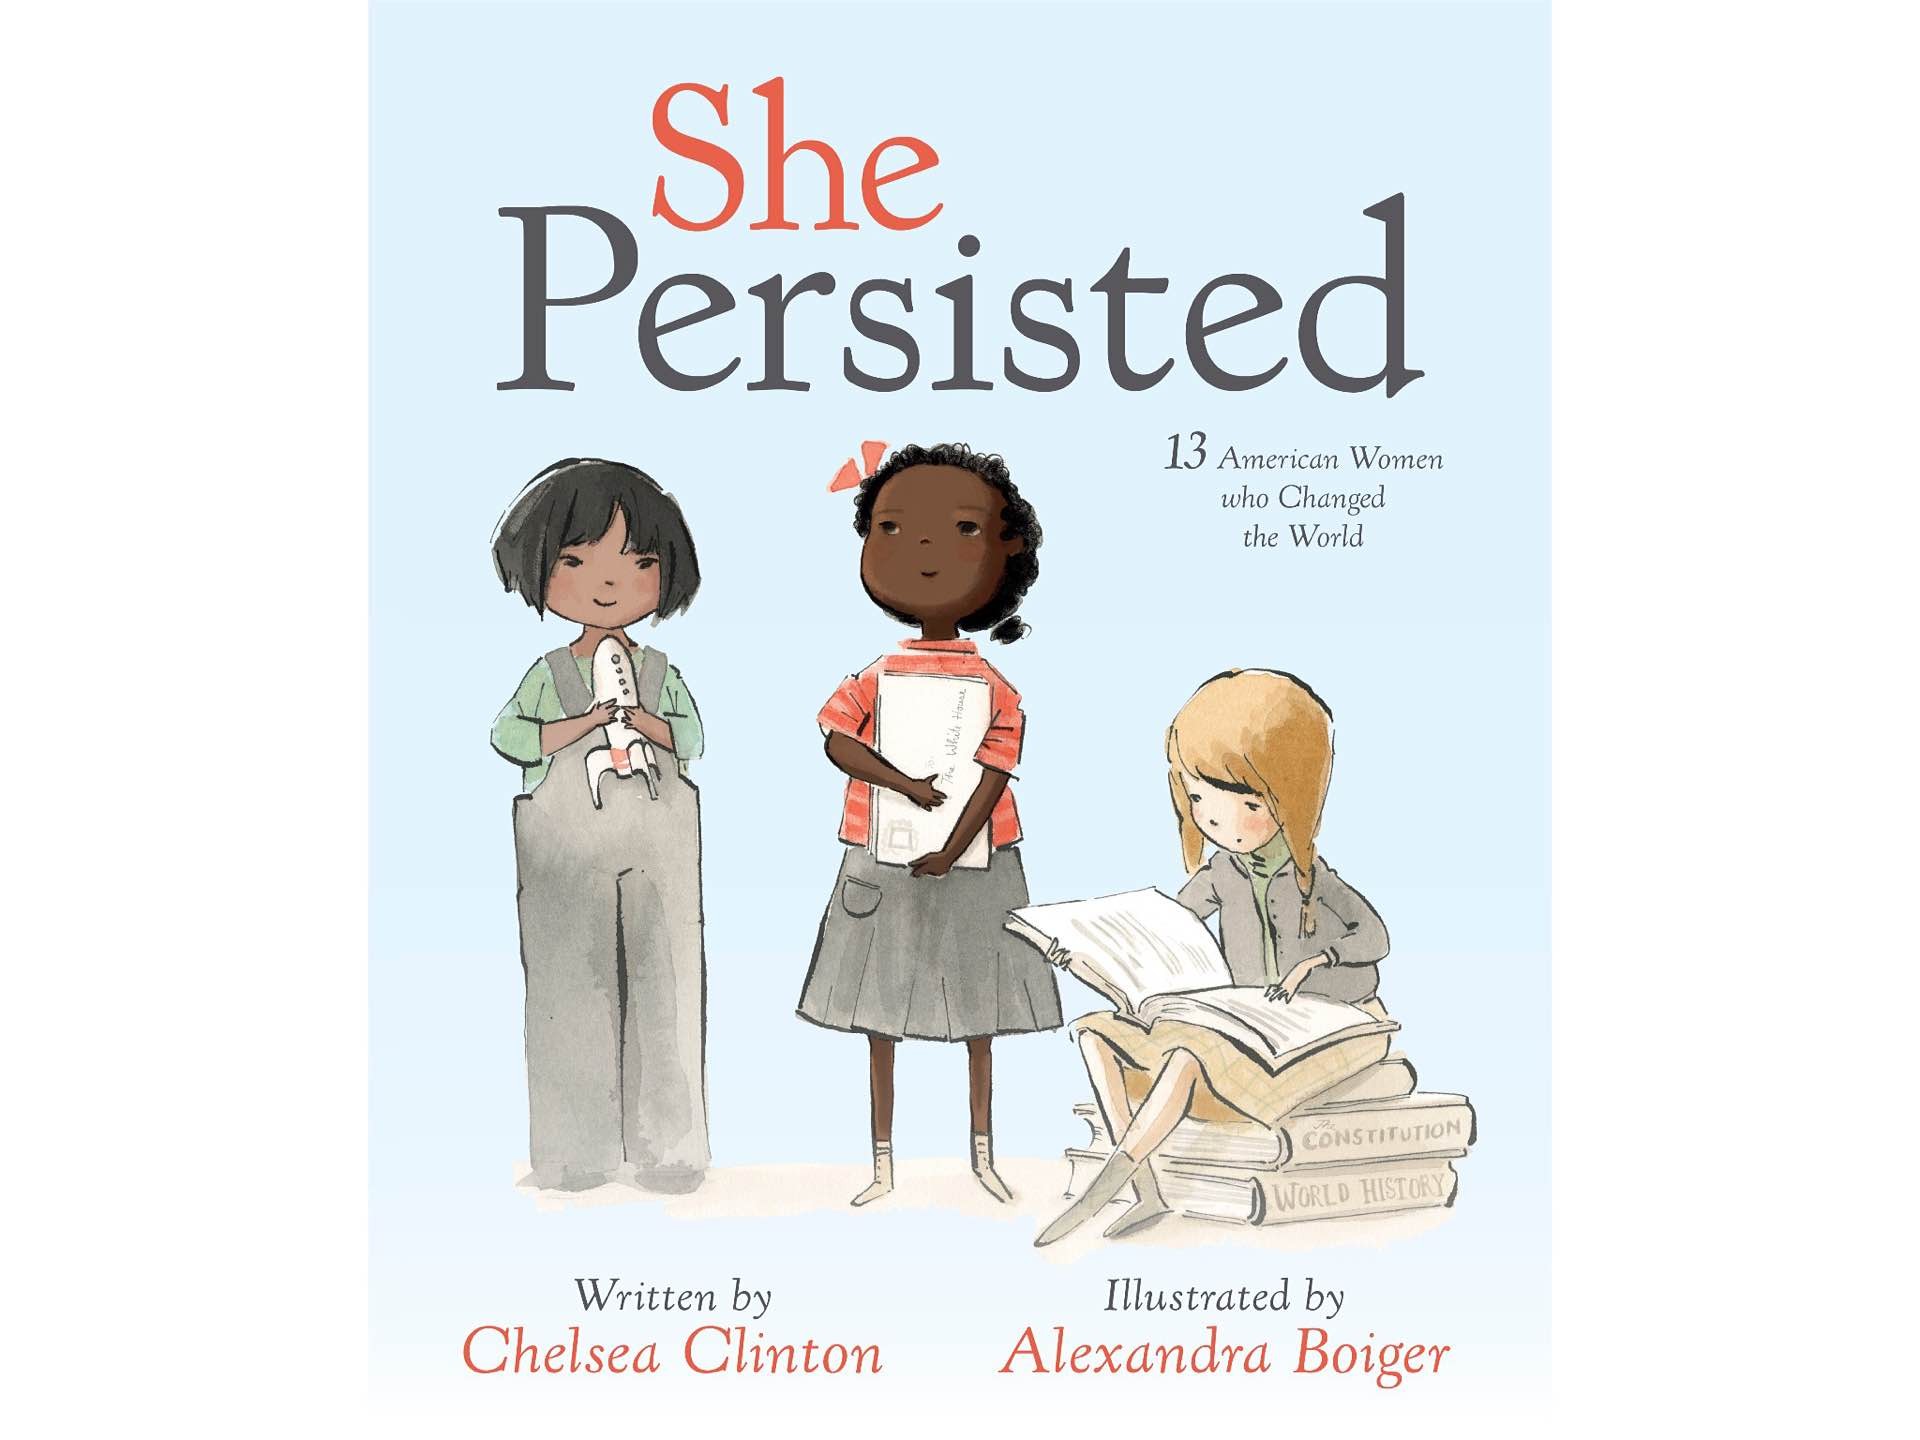 She Persisted by Chelsea Clinton.